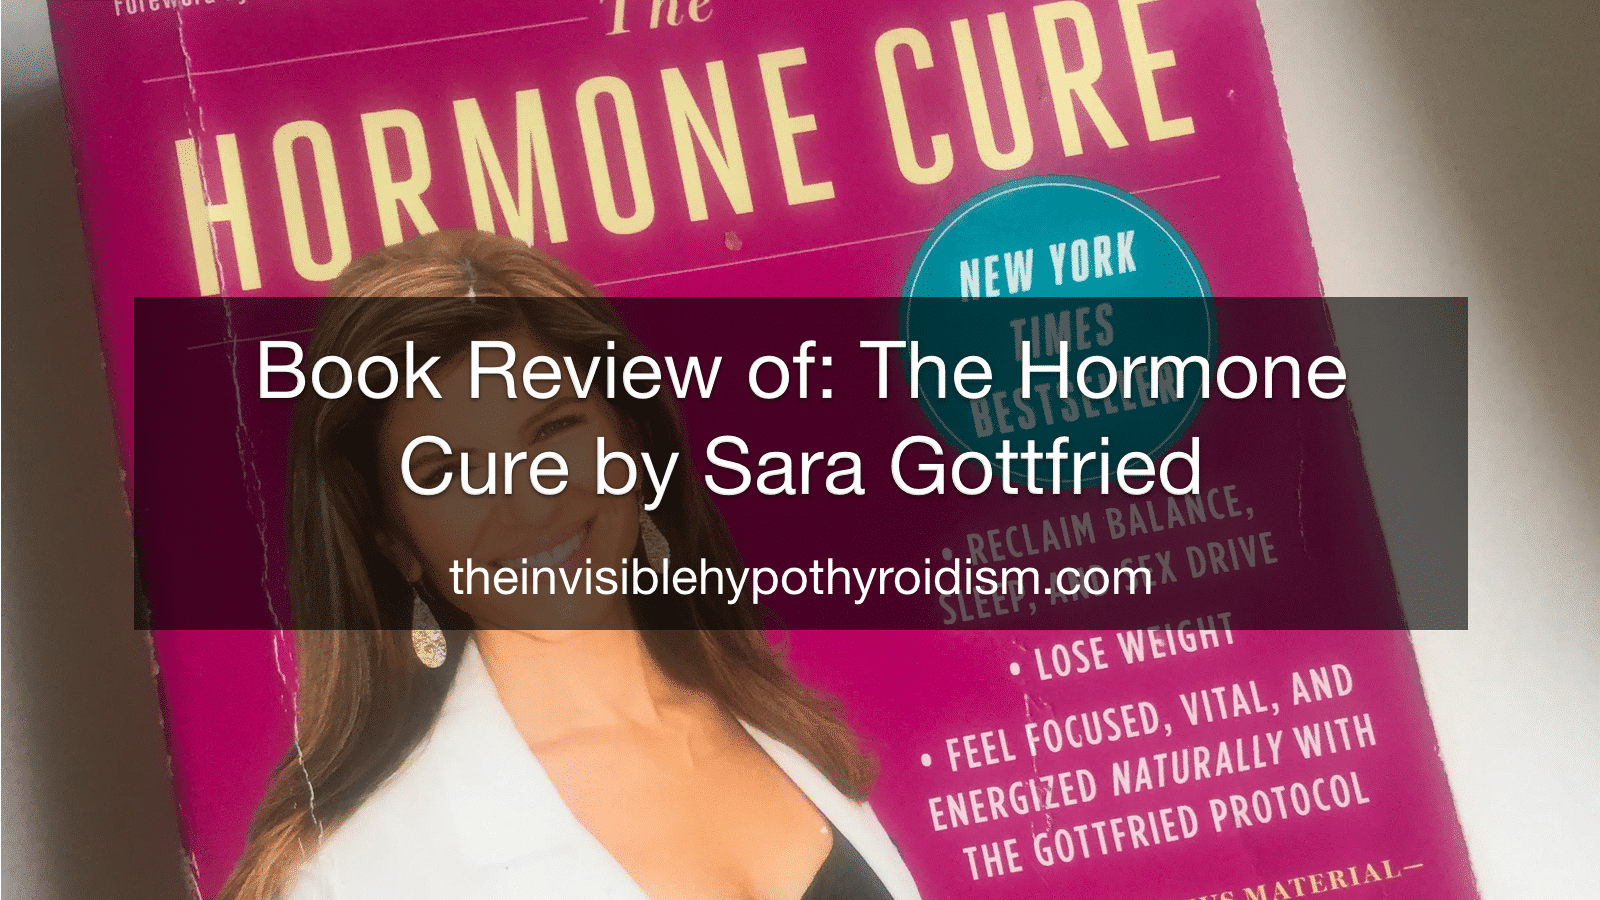 Book Review of: The Hormone Cure by Sara Gottfried, MD